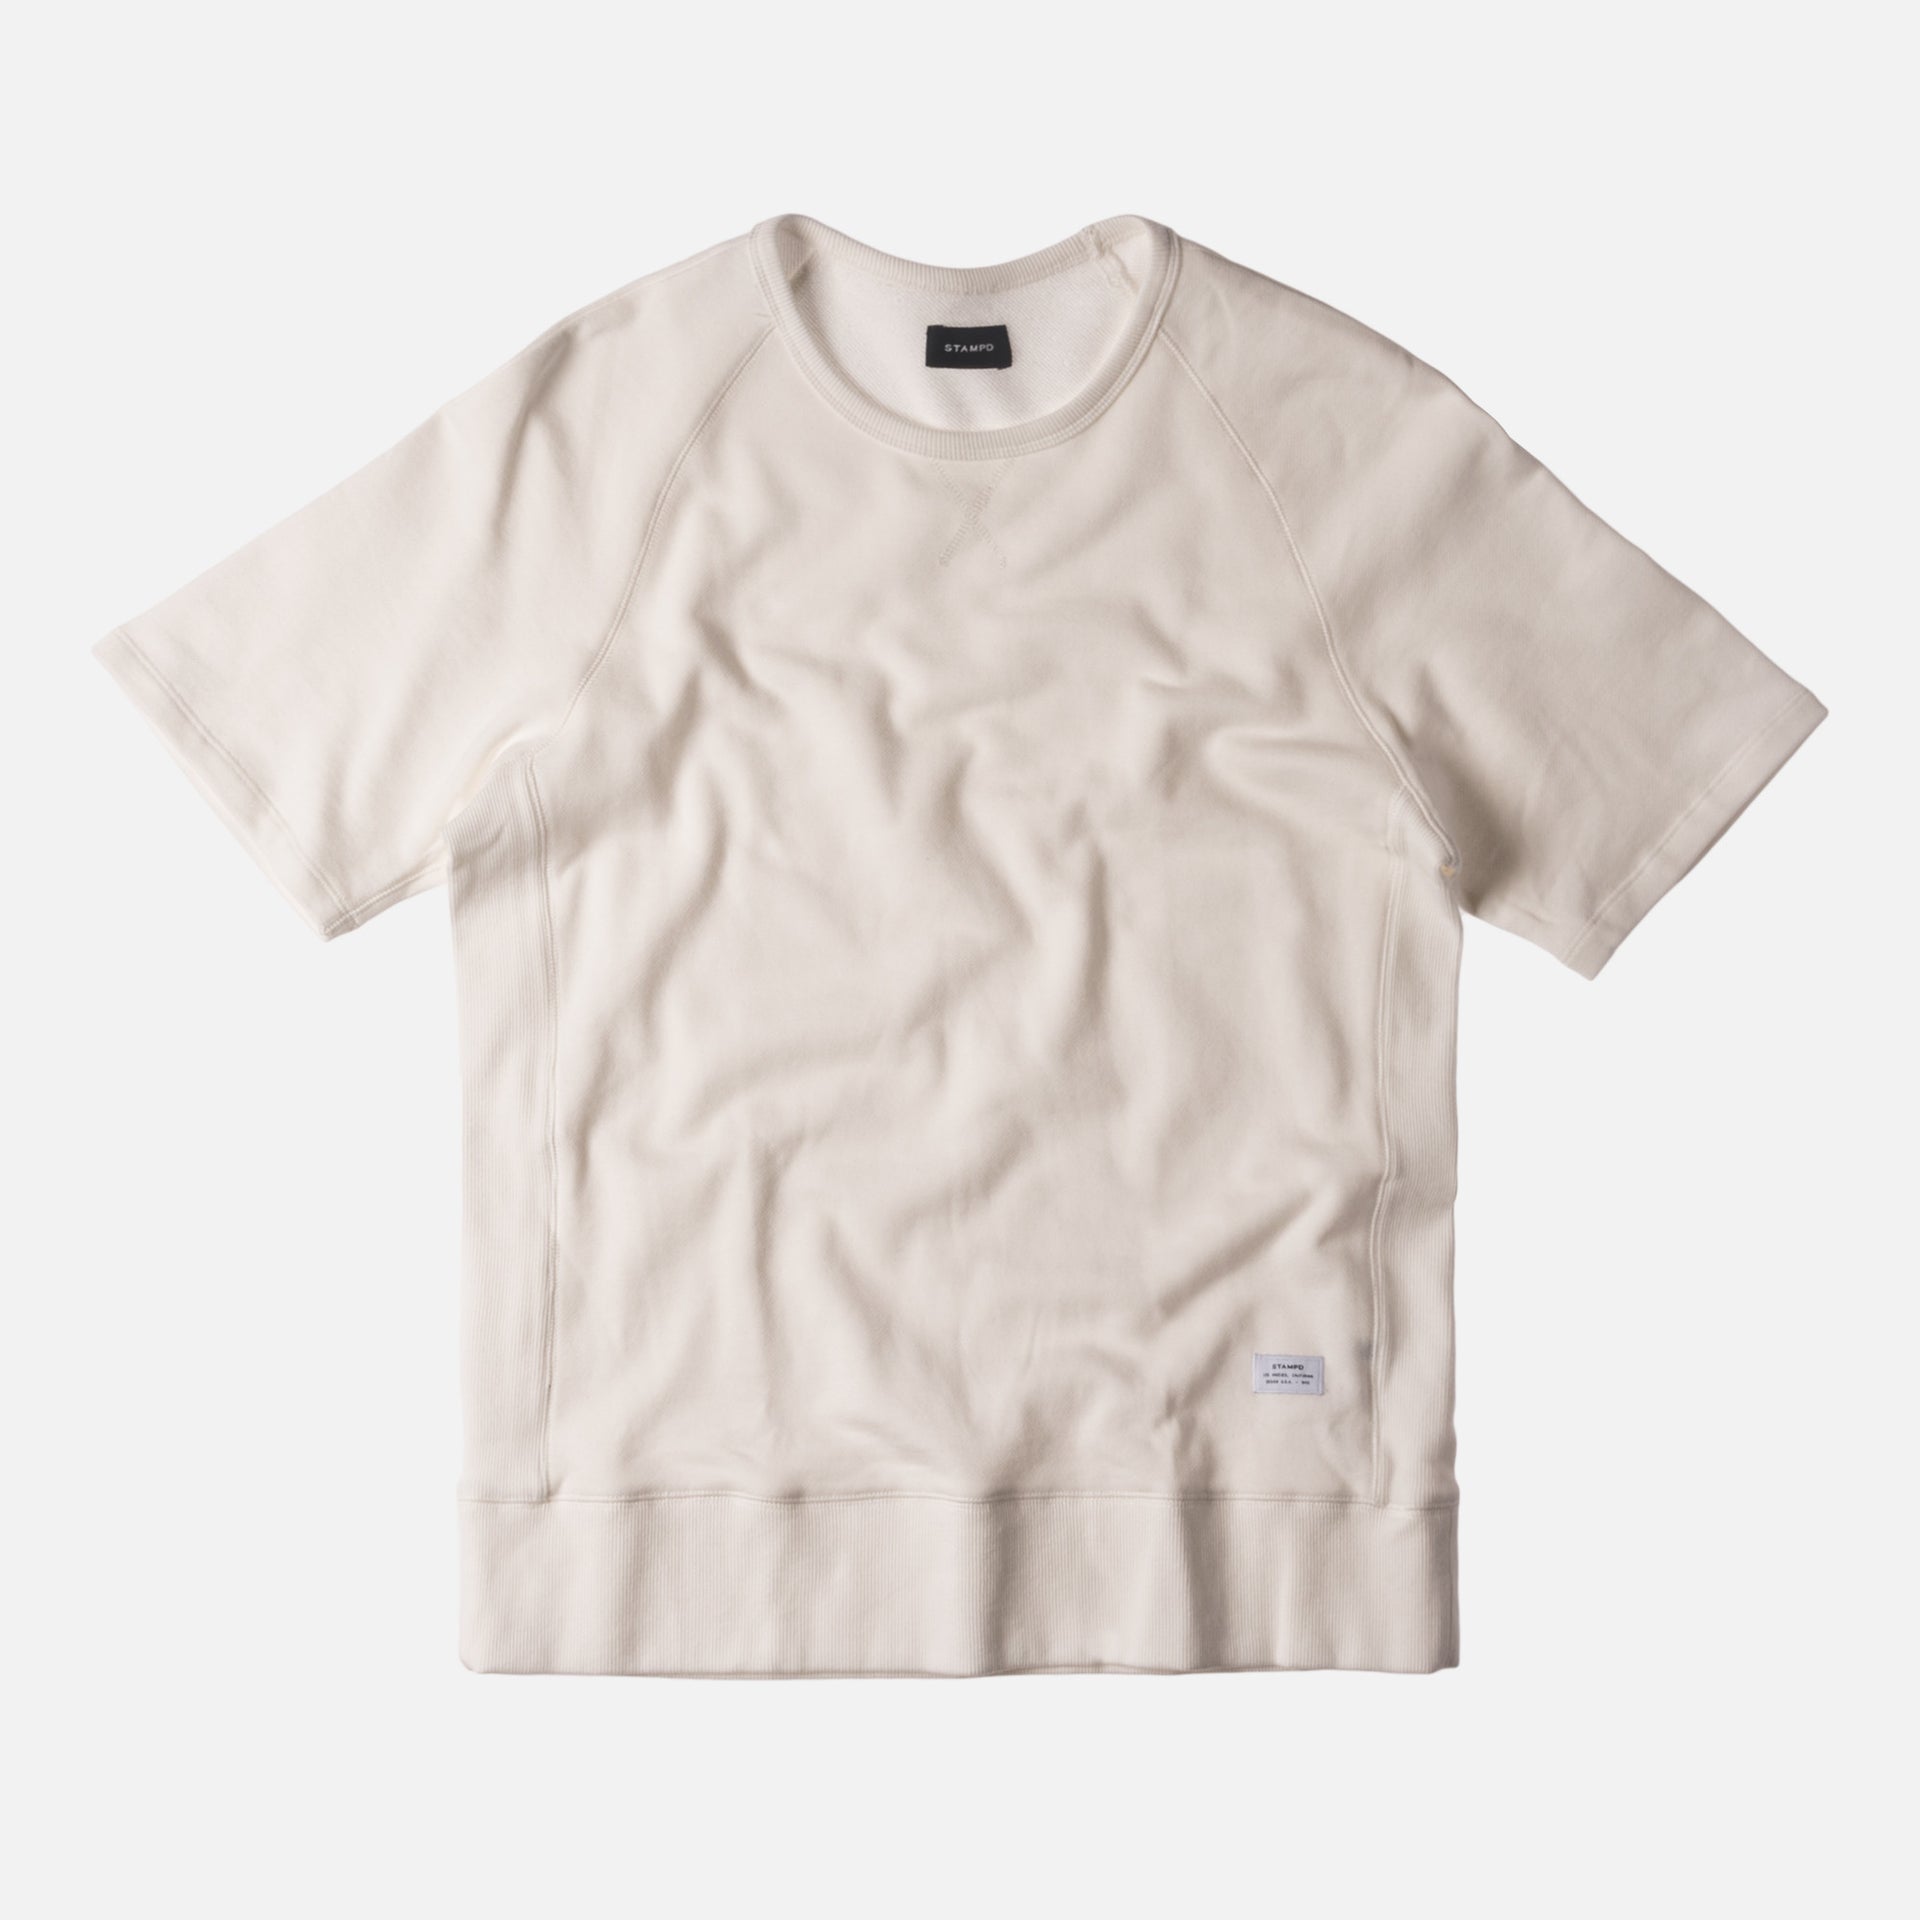 Stampd Field Short Sleeve Pullover - White